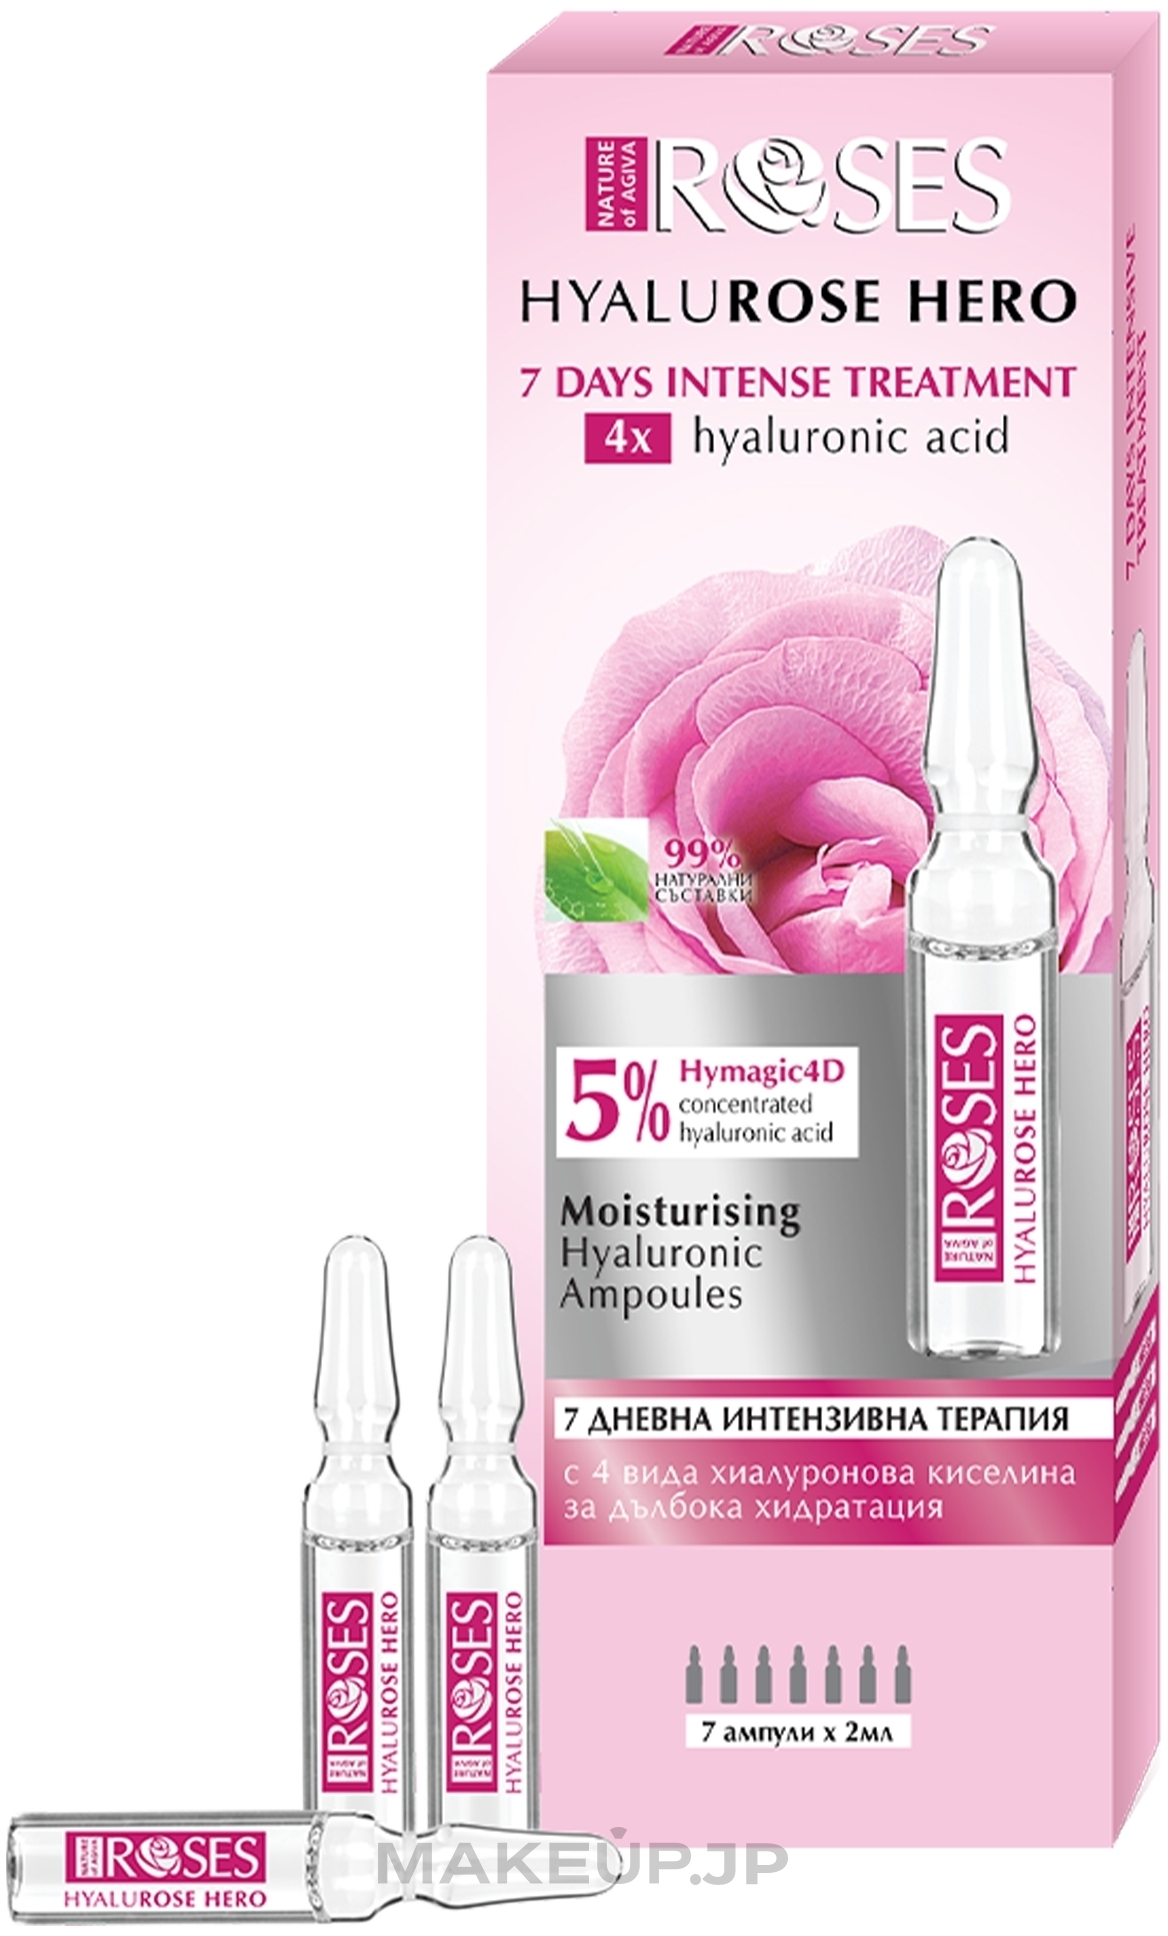 Moisturizing Face Ampoules with Hyaluronic Acid - Nature of Agiva Roses Hyalurose Hero Ampoules — photo 7 x 2 ml